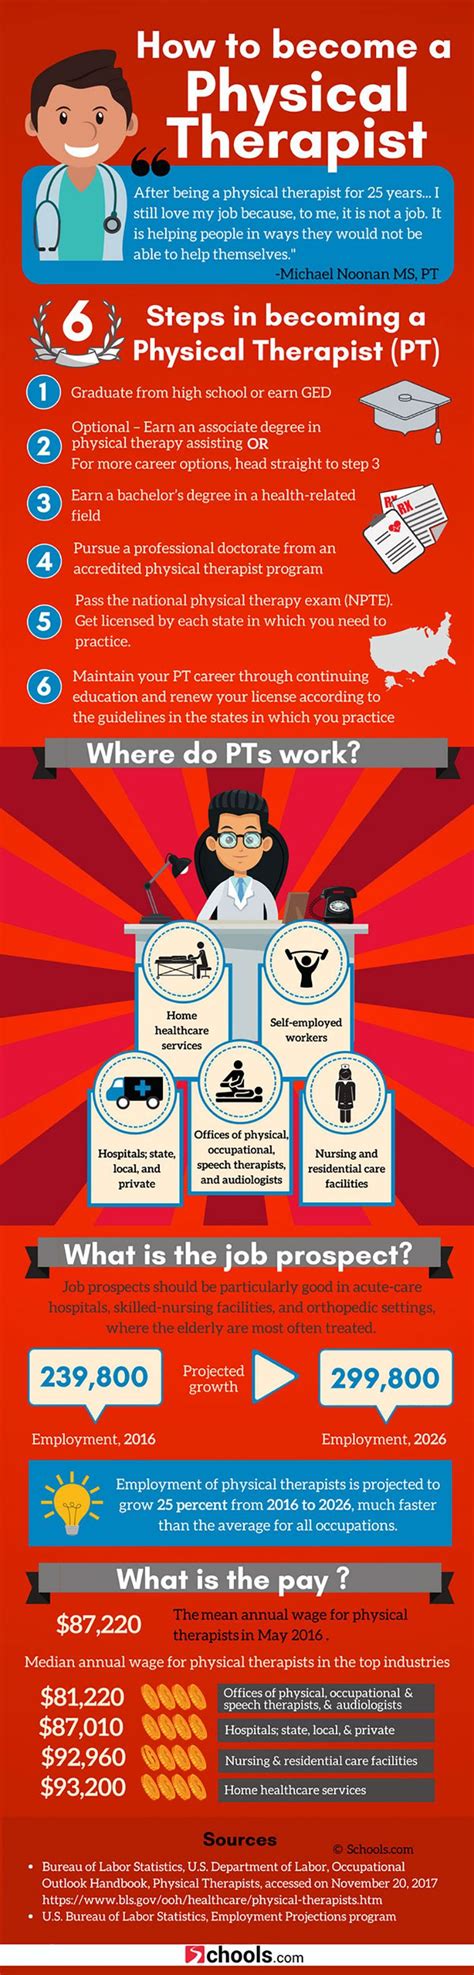 How To Build Your Career As A Physical Therapist Infographic